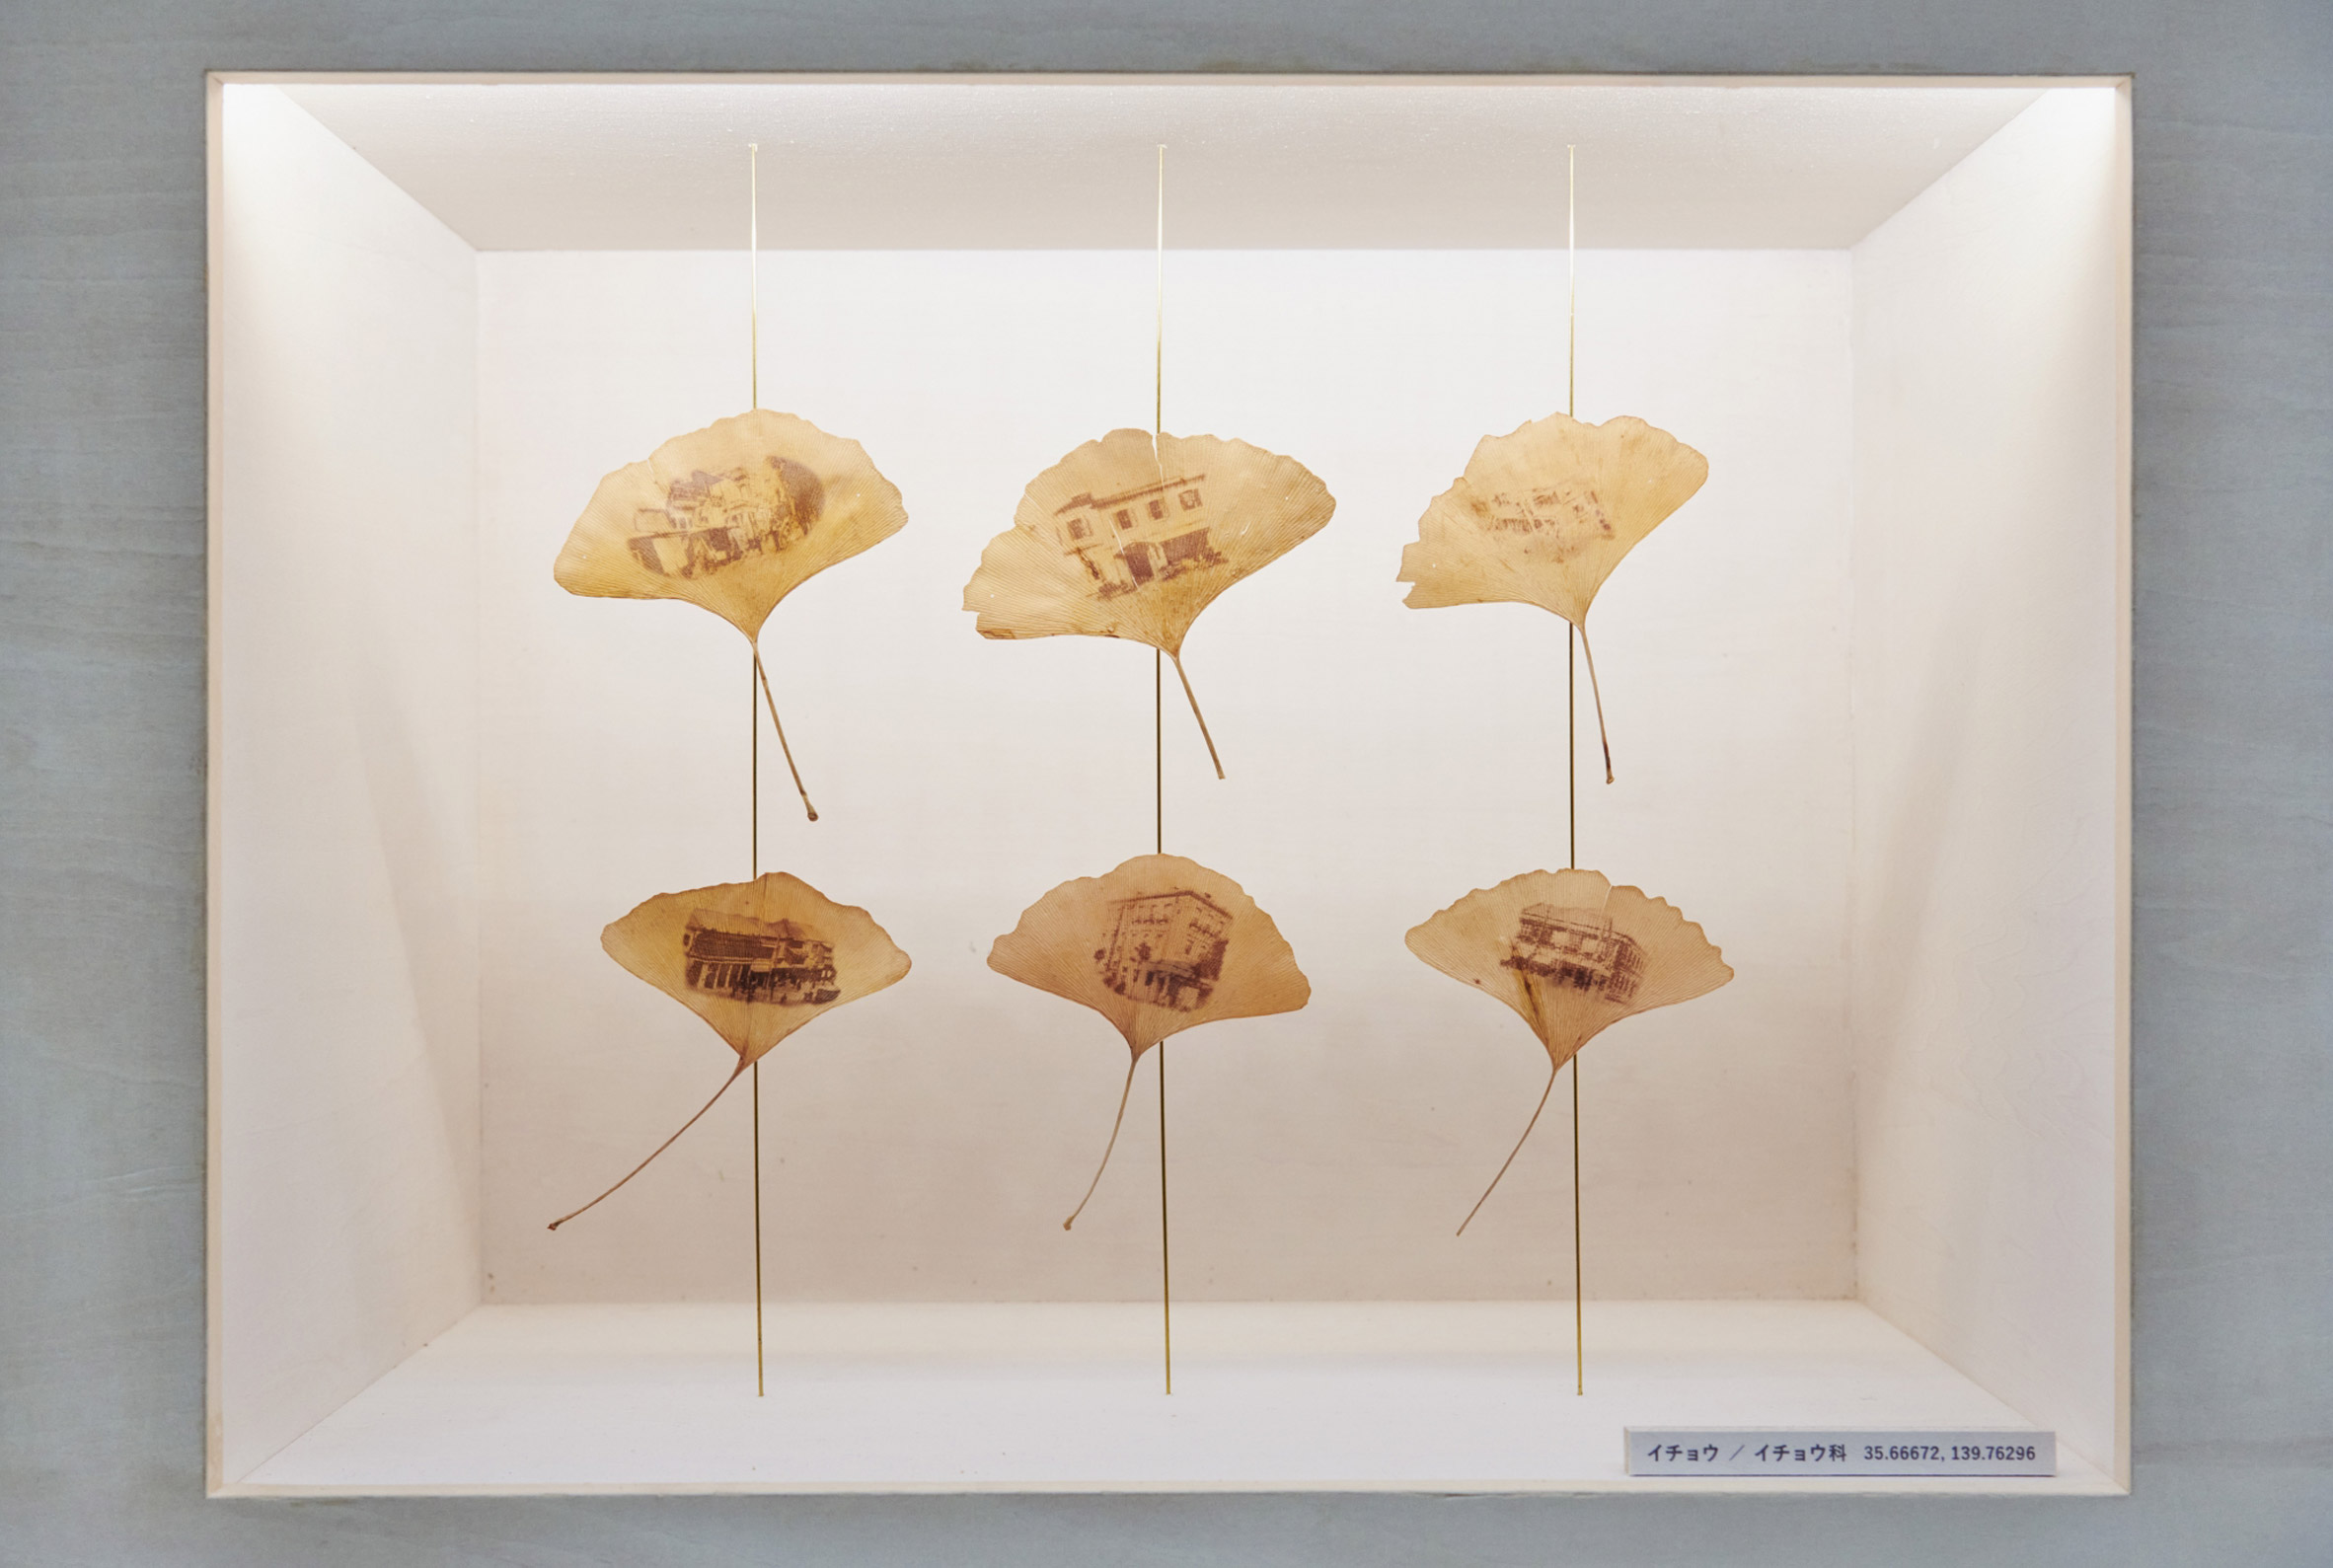 Ginkgo biloba trees printed with images of the district